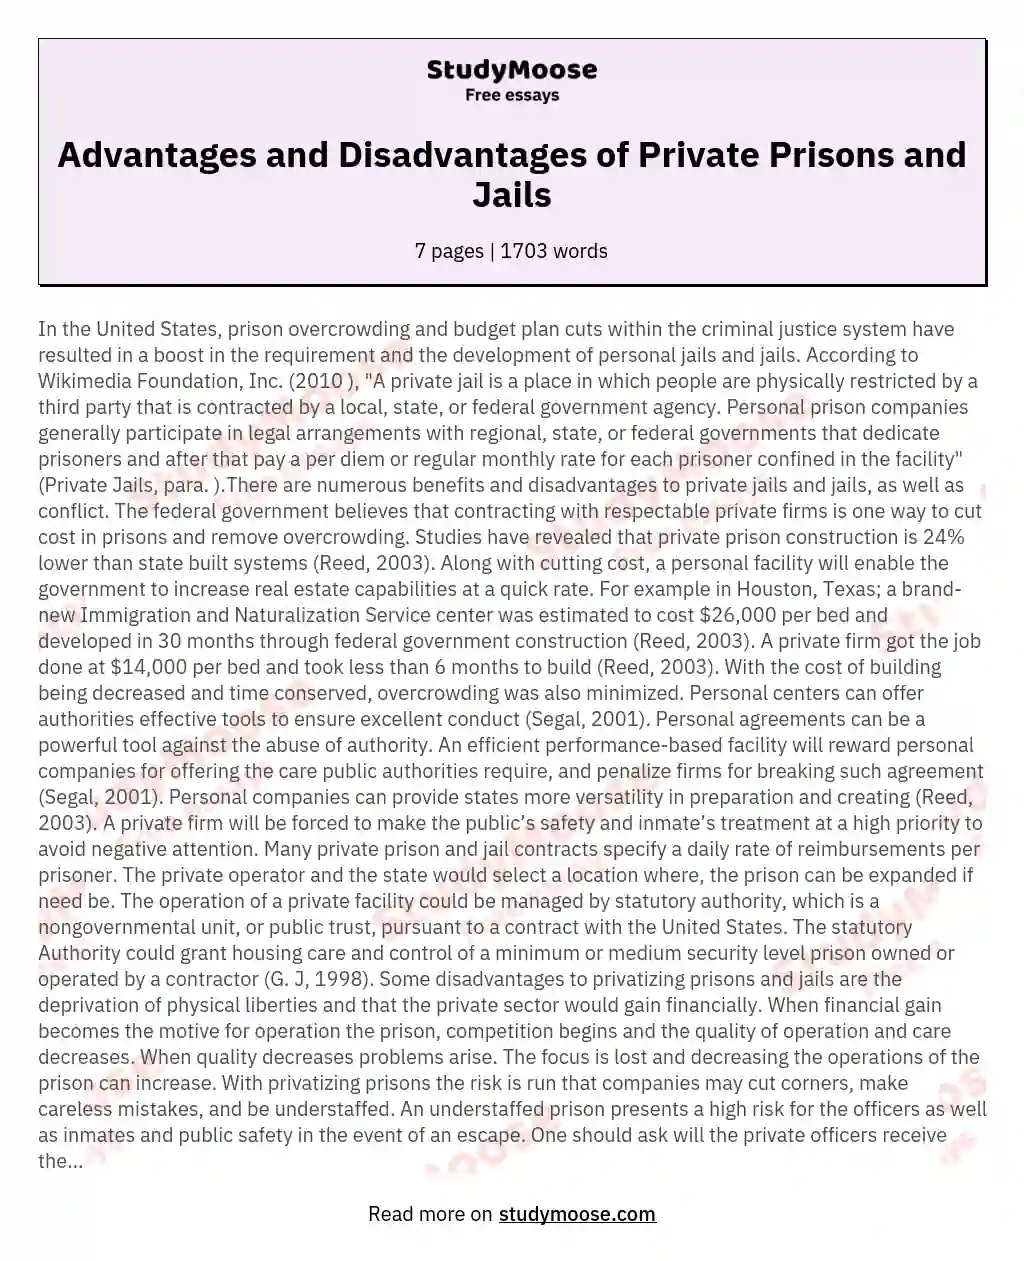 Advantages and Disadvantages of Private Prisons and Jails